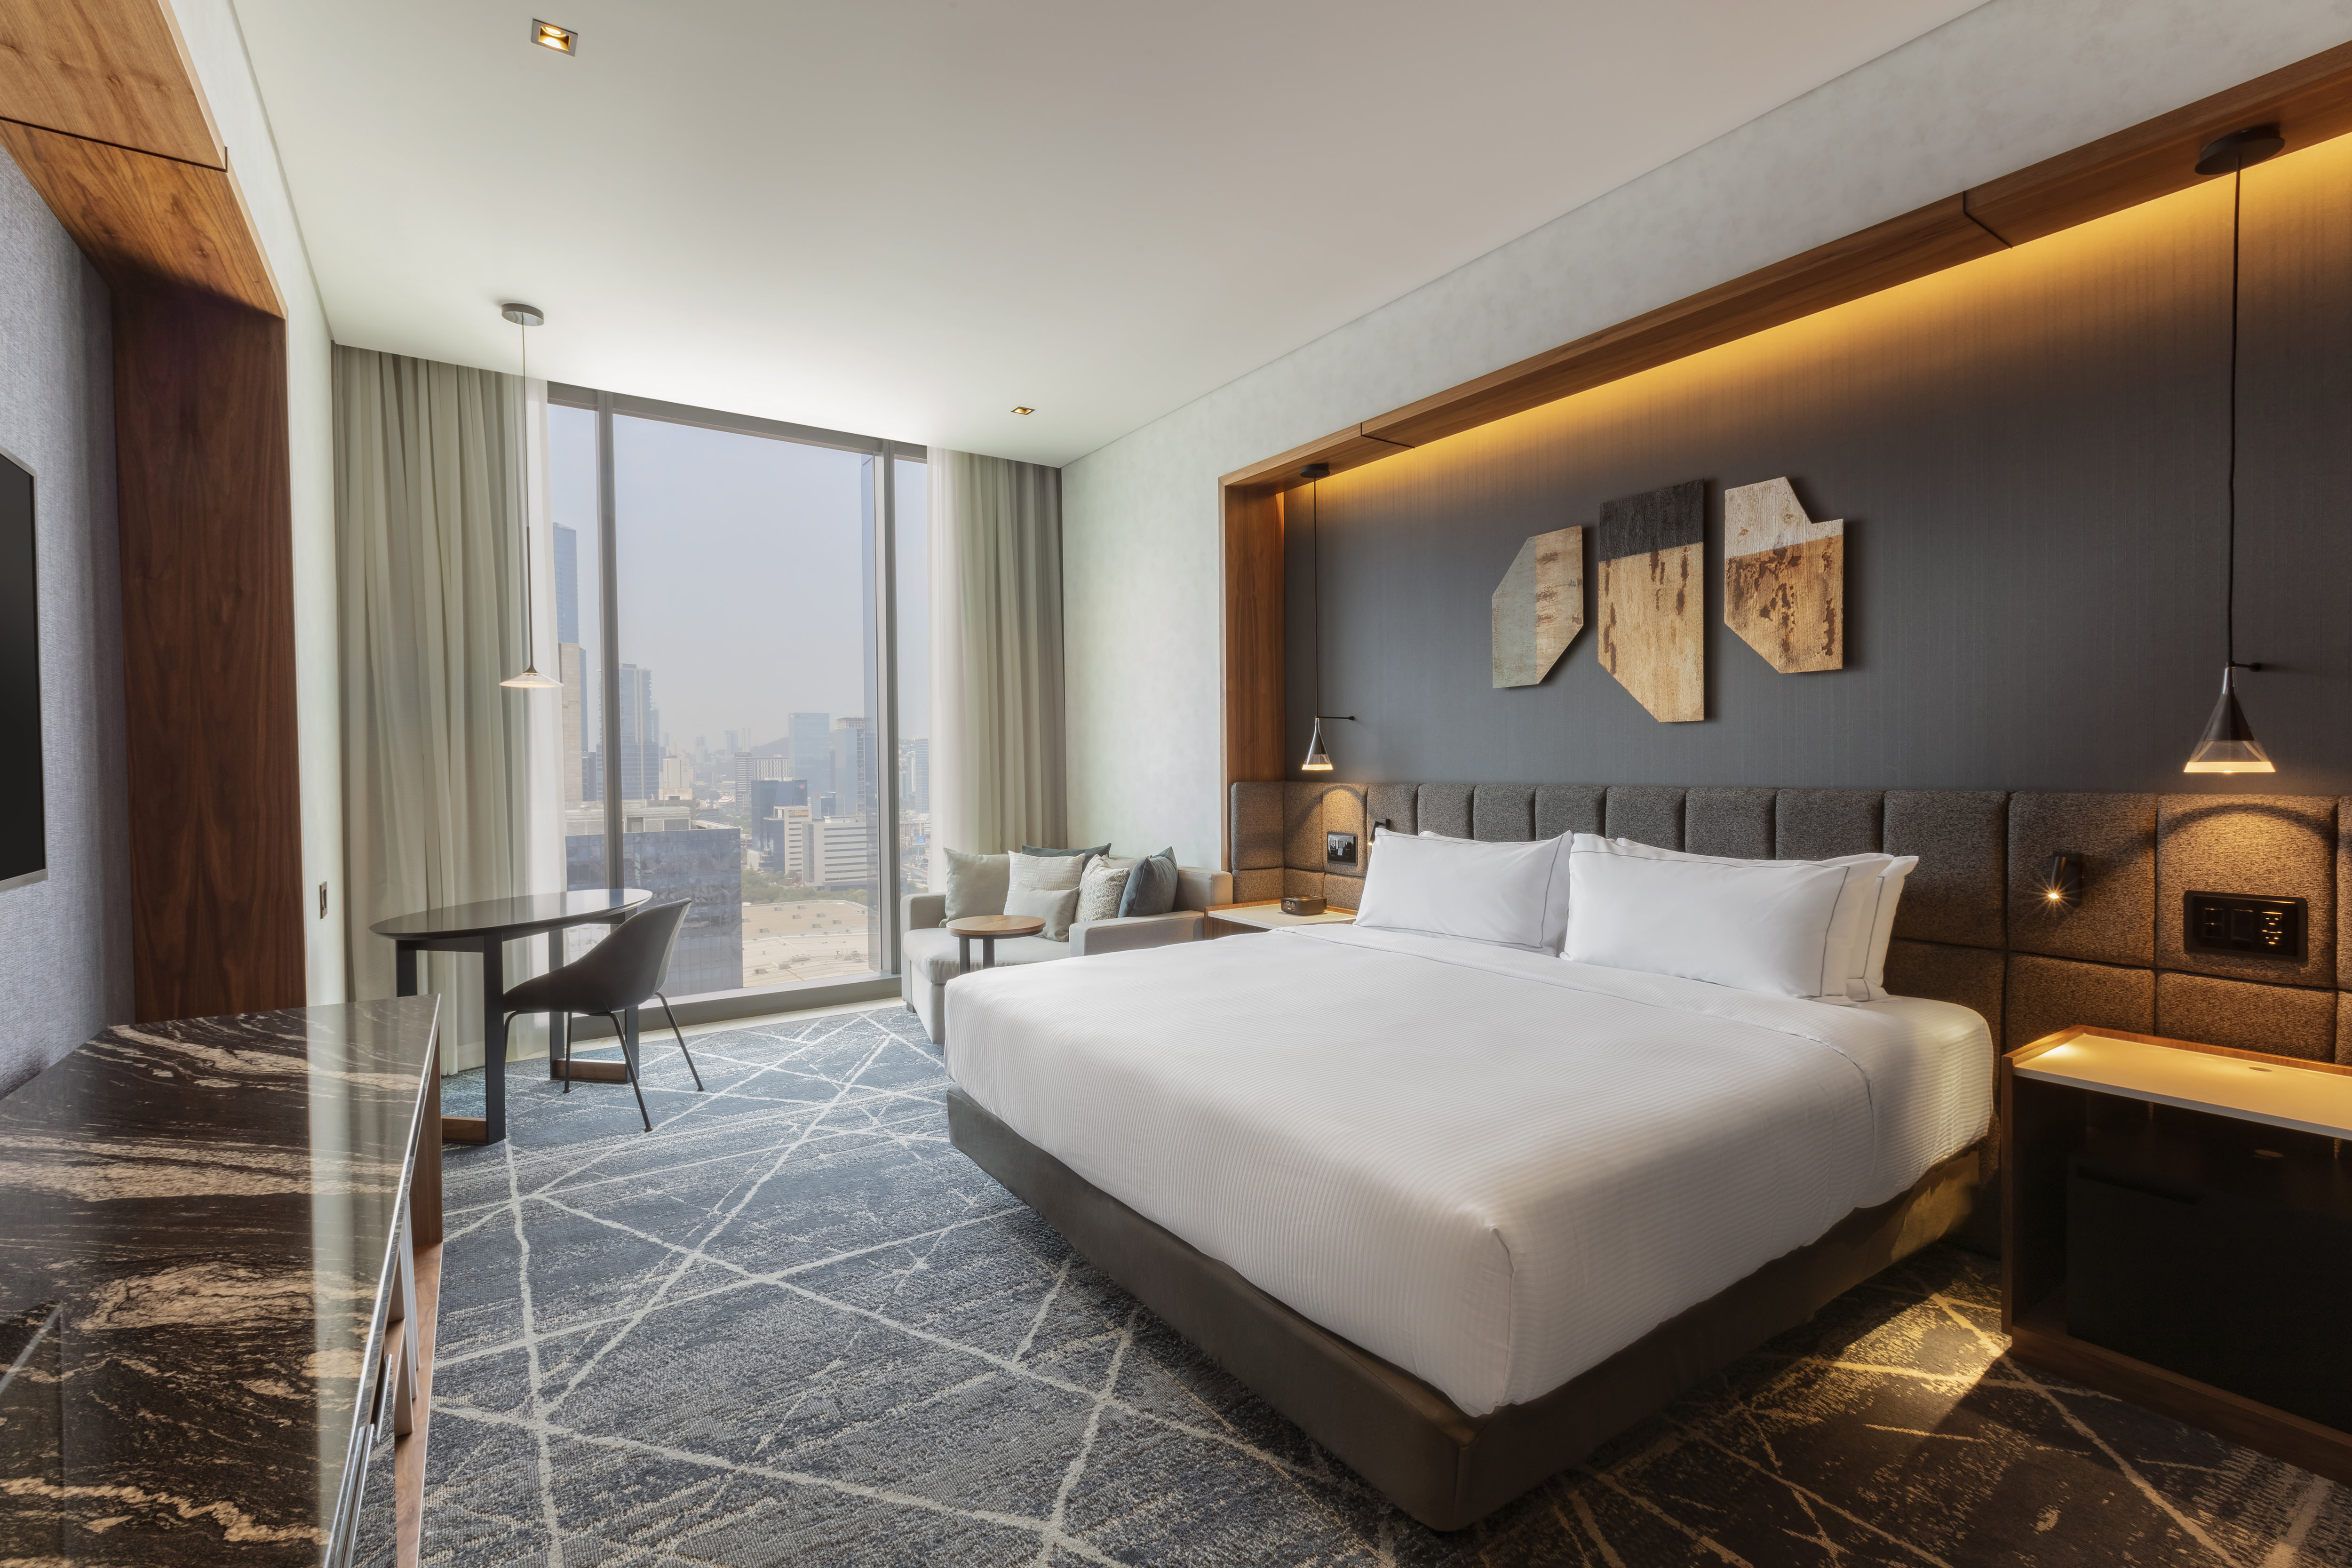 Guest room with king-sized bed, sofa and floor-to-ceiling windows with views of the city